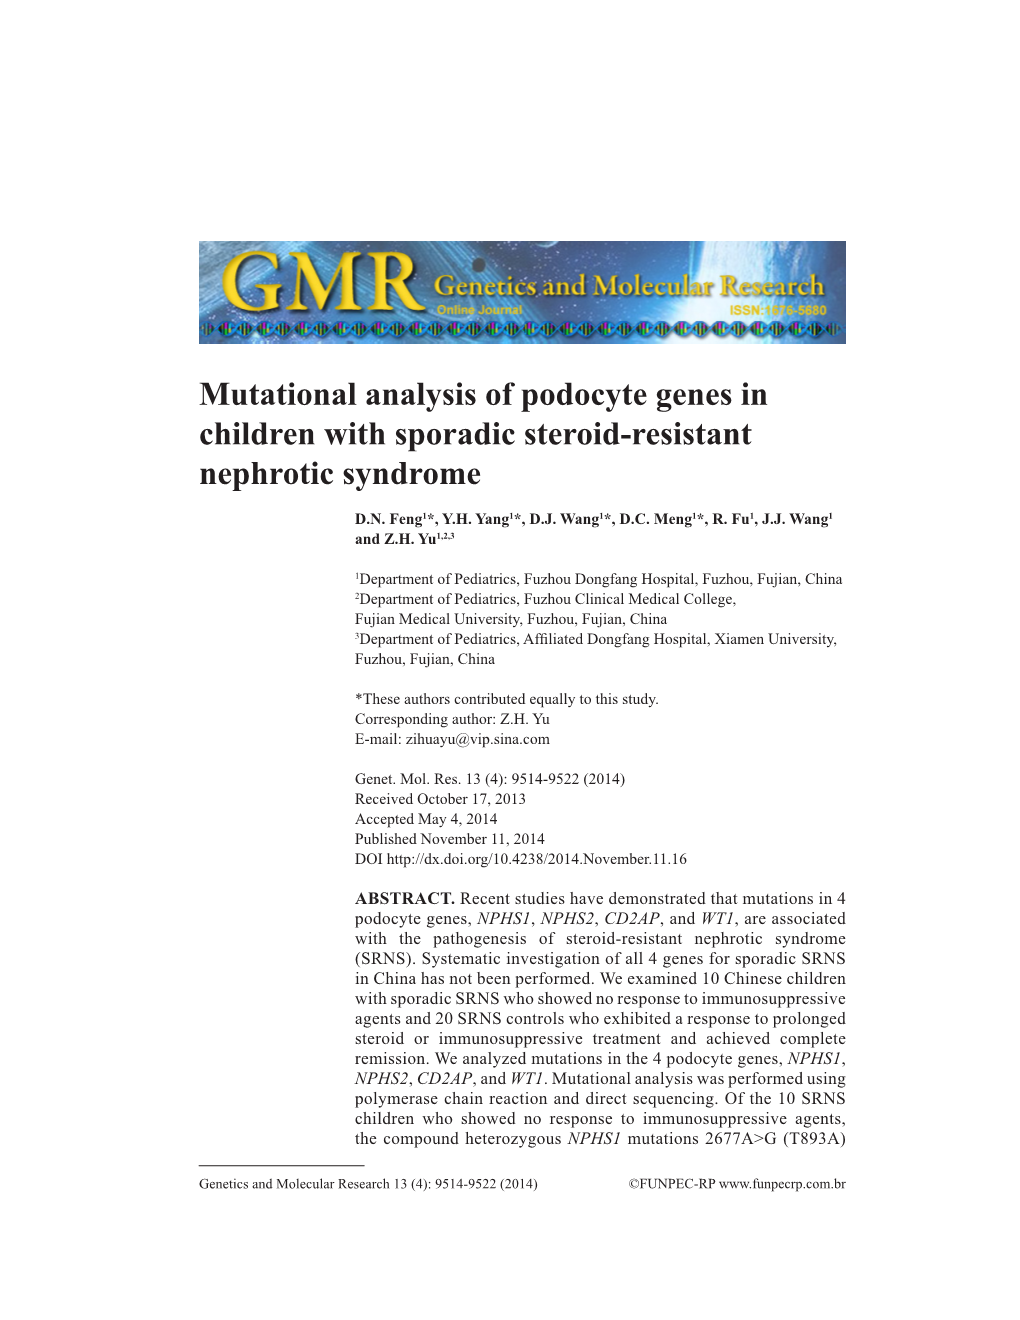 Mutational Analysis of Podocyte Genes in Children with Sporadic Steroid-Resistant Nephrotic Syndrome